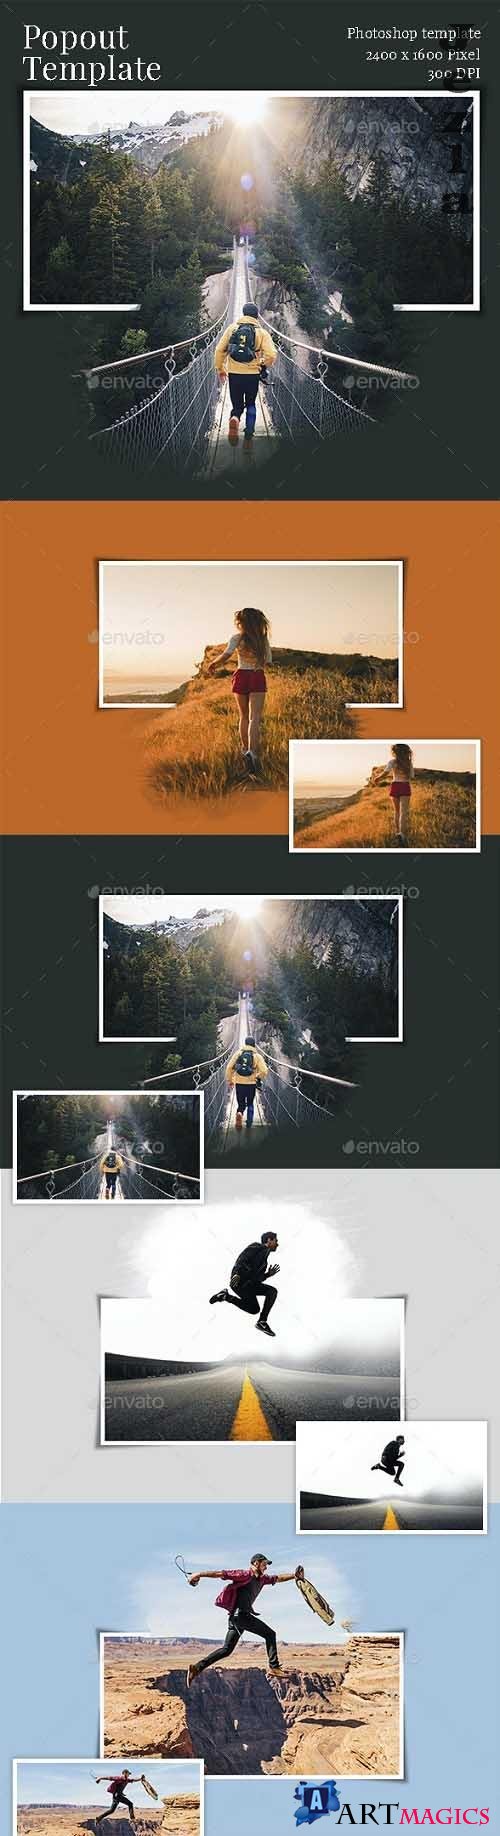 Popout Photo Template - 32807988